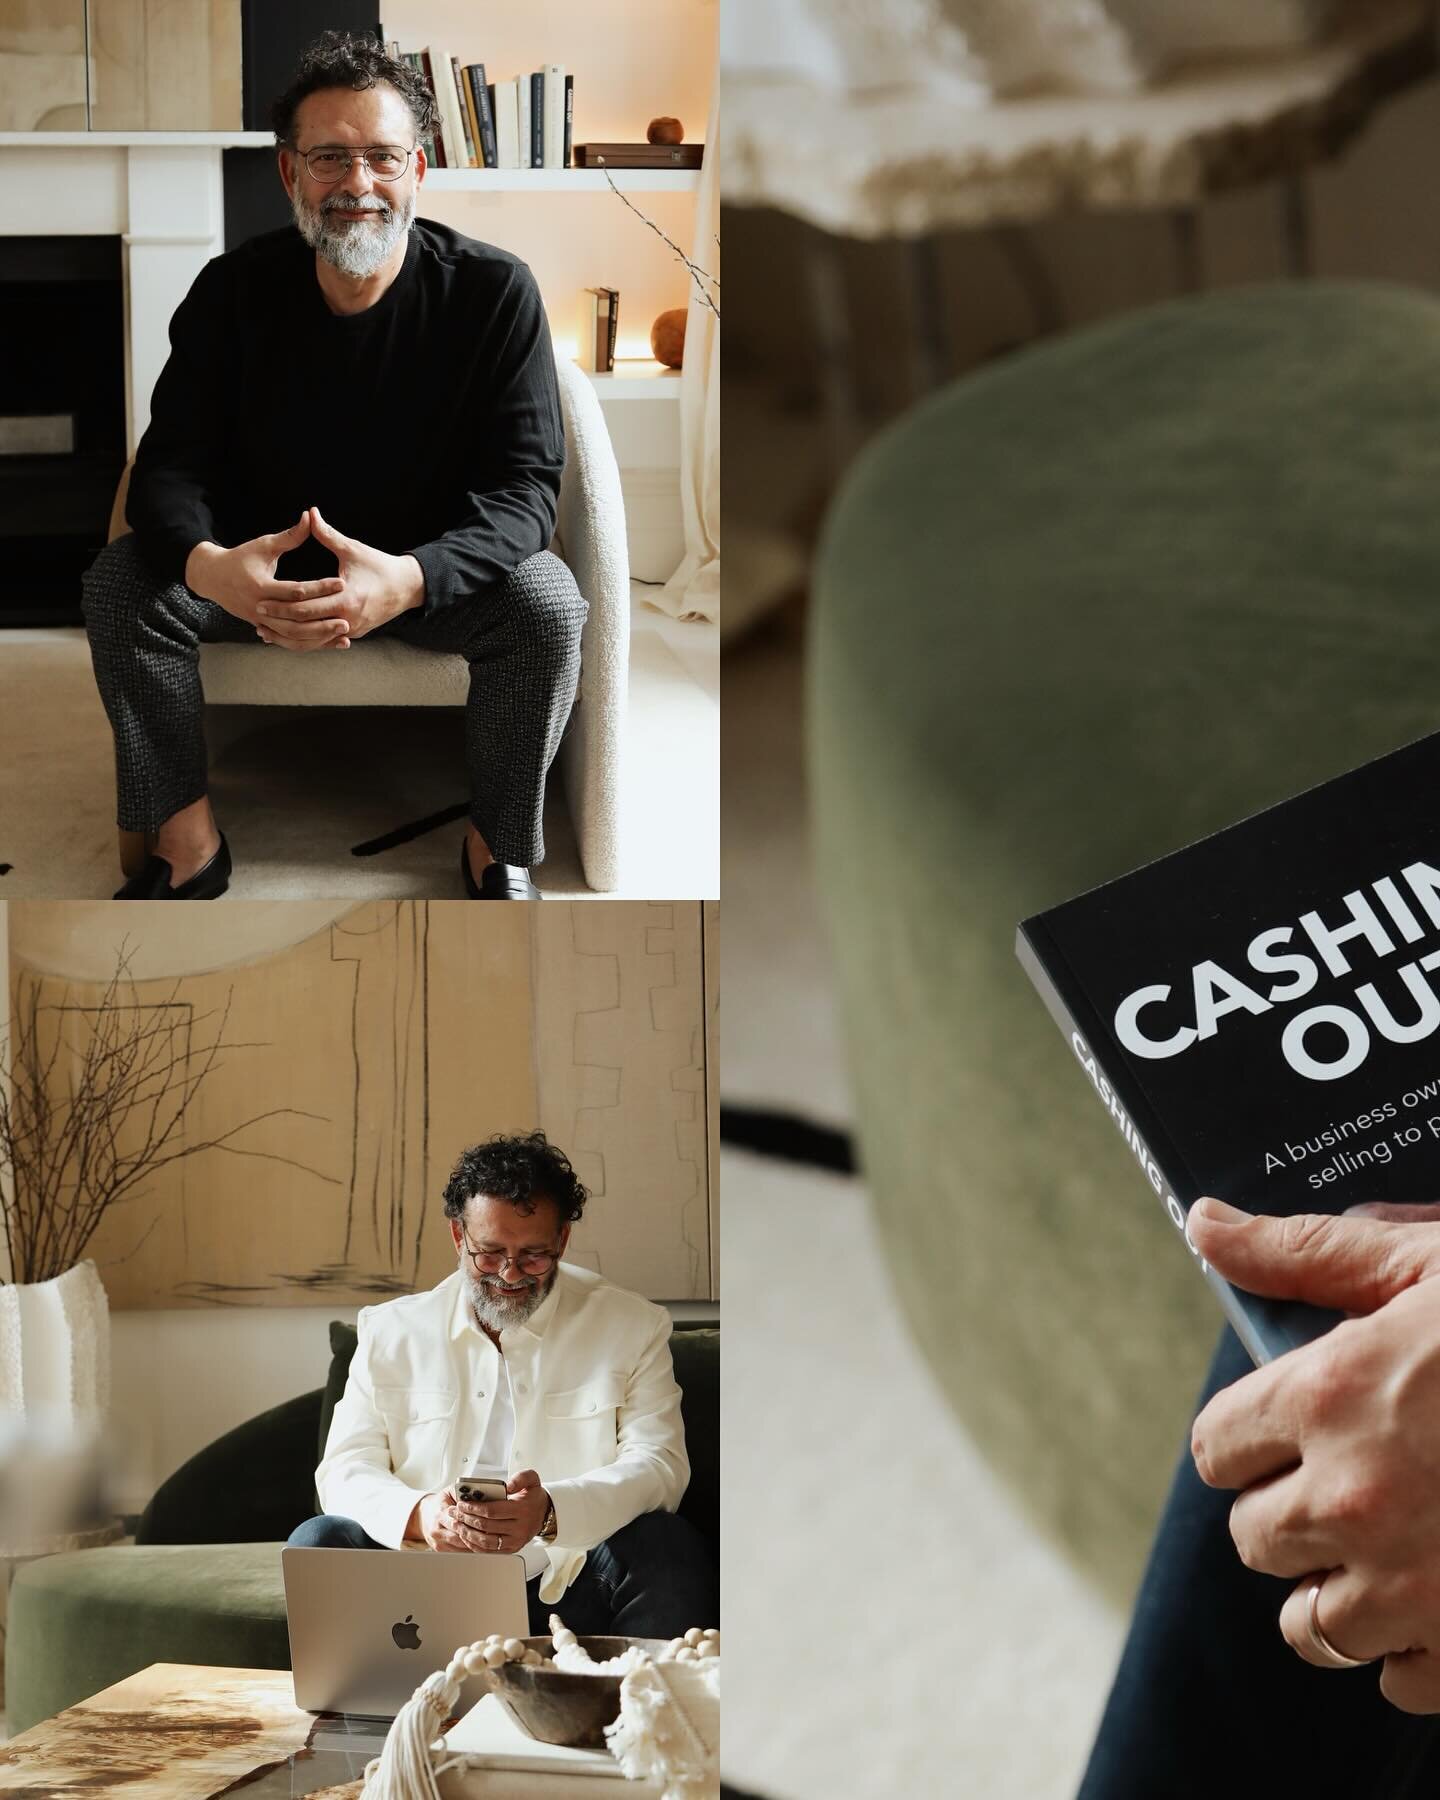 Last week I had the pleasure of capturing Alexis Sikorsky in the lead up to his book launch &lsquo;Cashing Out&rsquo; &mdash; a business owner&rsquo;s guide to selling to private equity, which hits stands on the 16th of April. 

Having achieved succe